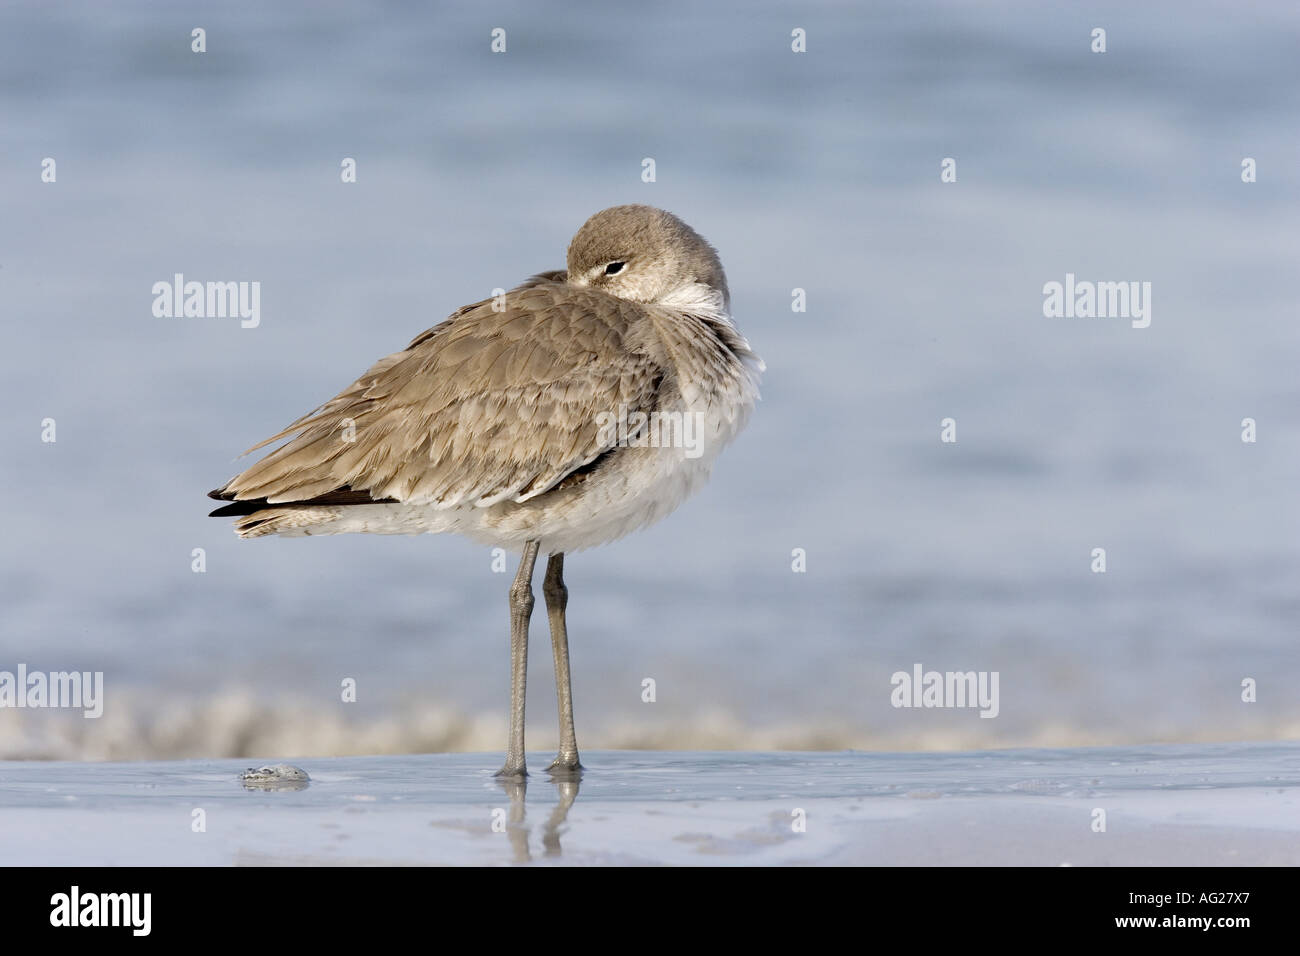 zoology / animals, avian / bird, Scolopacidae, Willet (Catoptrophorus semipalmatus), standing in water, beach, De Soto Park, Florida, USA, distribution: worldwide, Additional-Rights-Clearance-Info-Not-Available Stock Photo